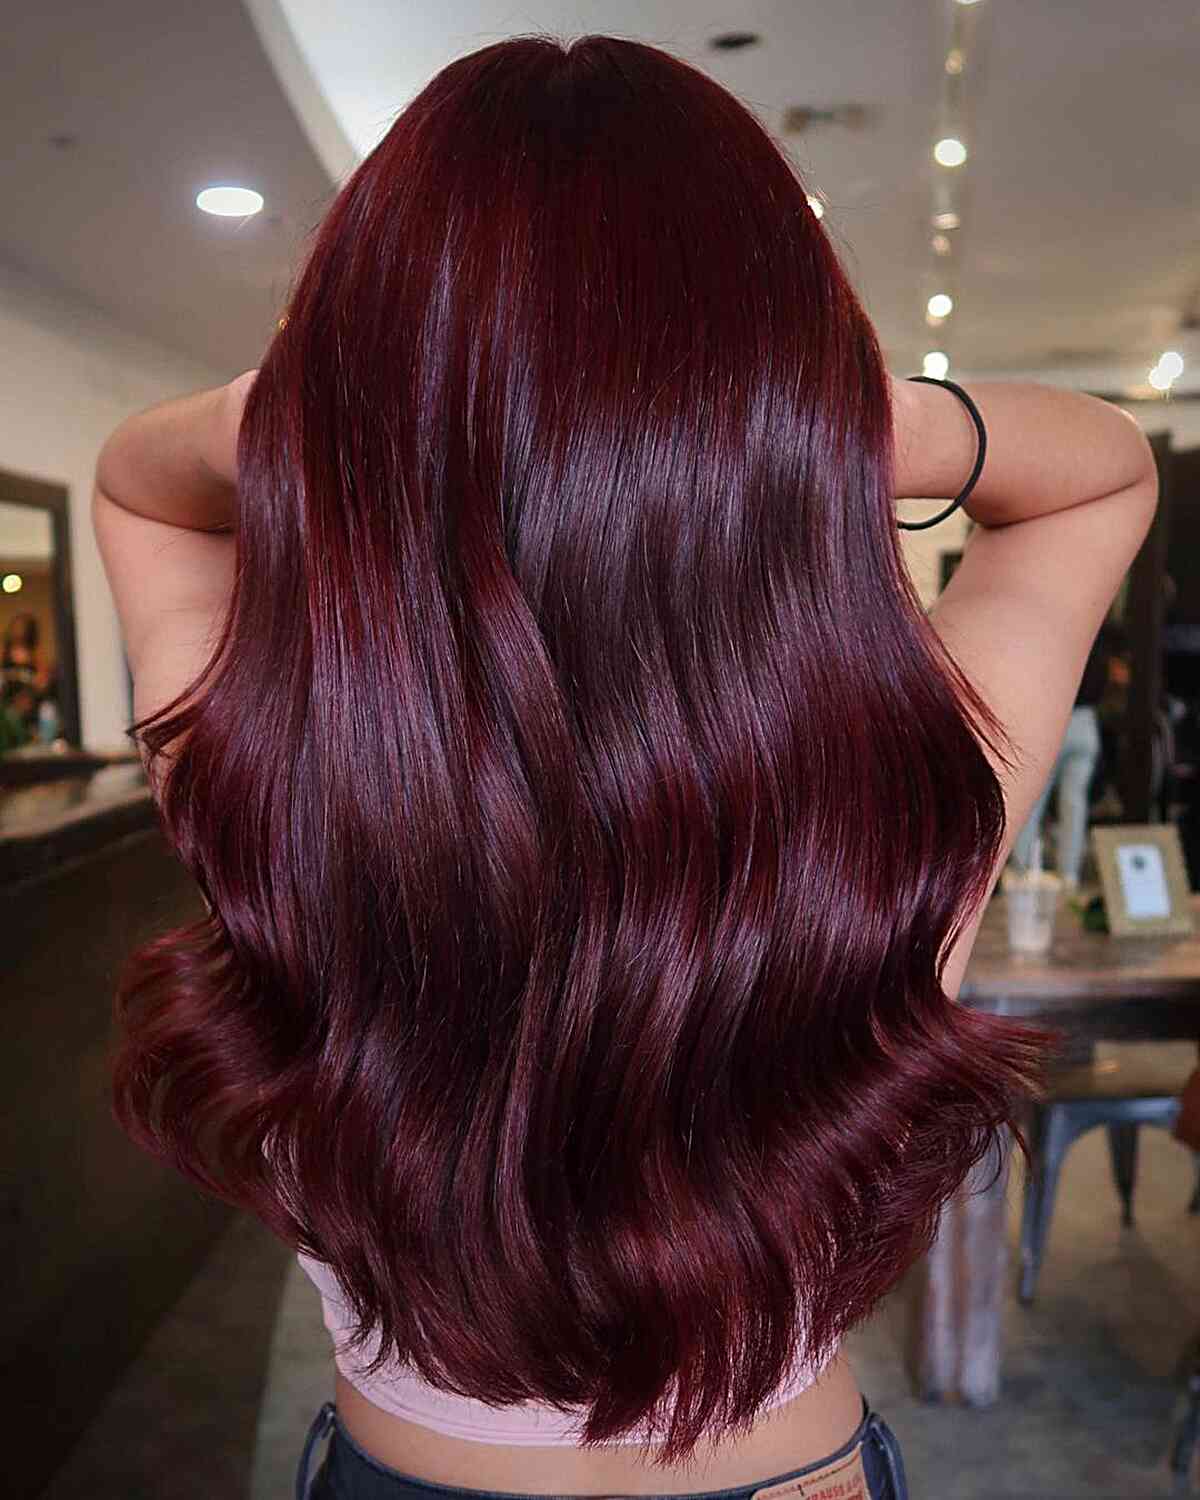 Red Wine-Inspired Long Wavy Hairstyle for ladies with long hair